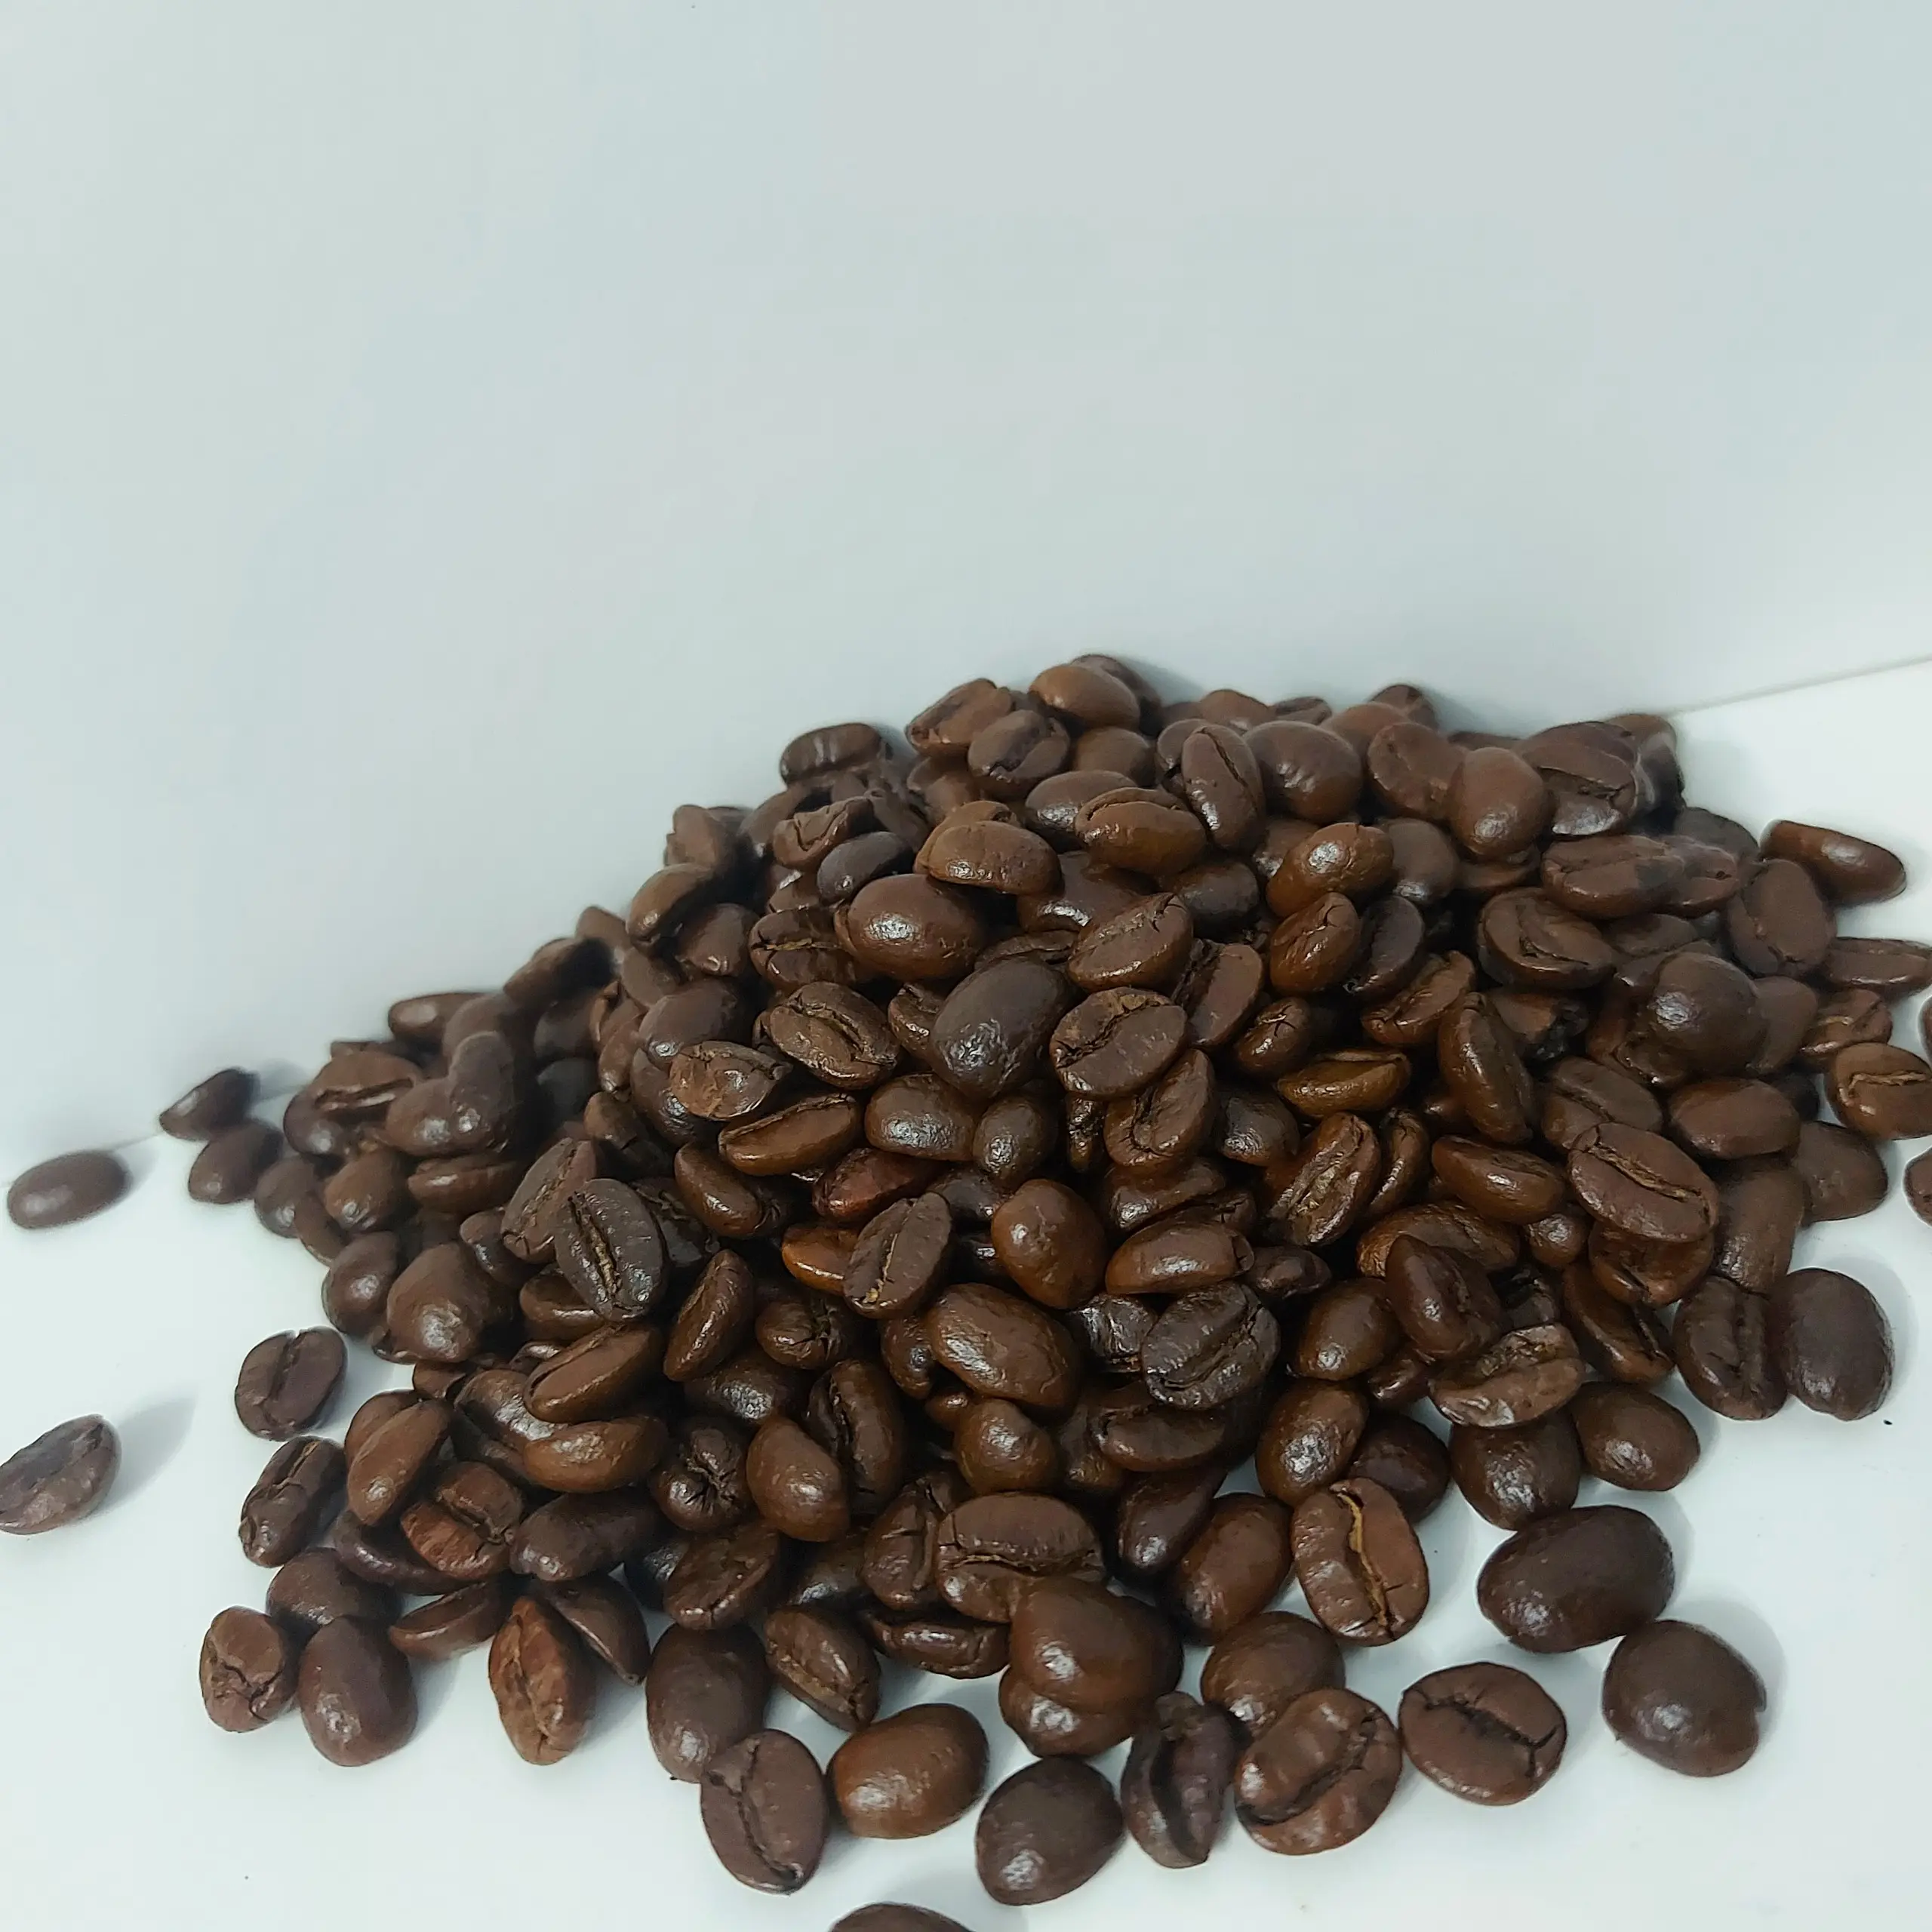 1. Top Selling Robusta Roasted Coffee Beans Screen-18 With HACCP -ISO 9001:2015 Certificated Mariocoffee Brand From Viet Nam 1kg